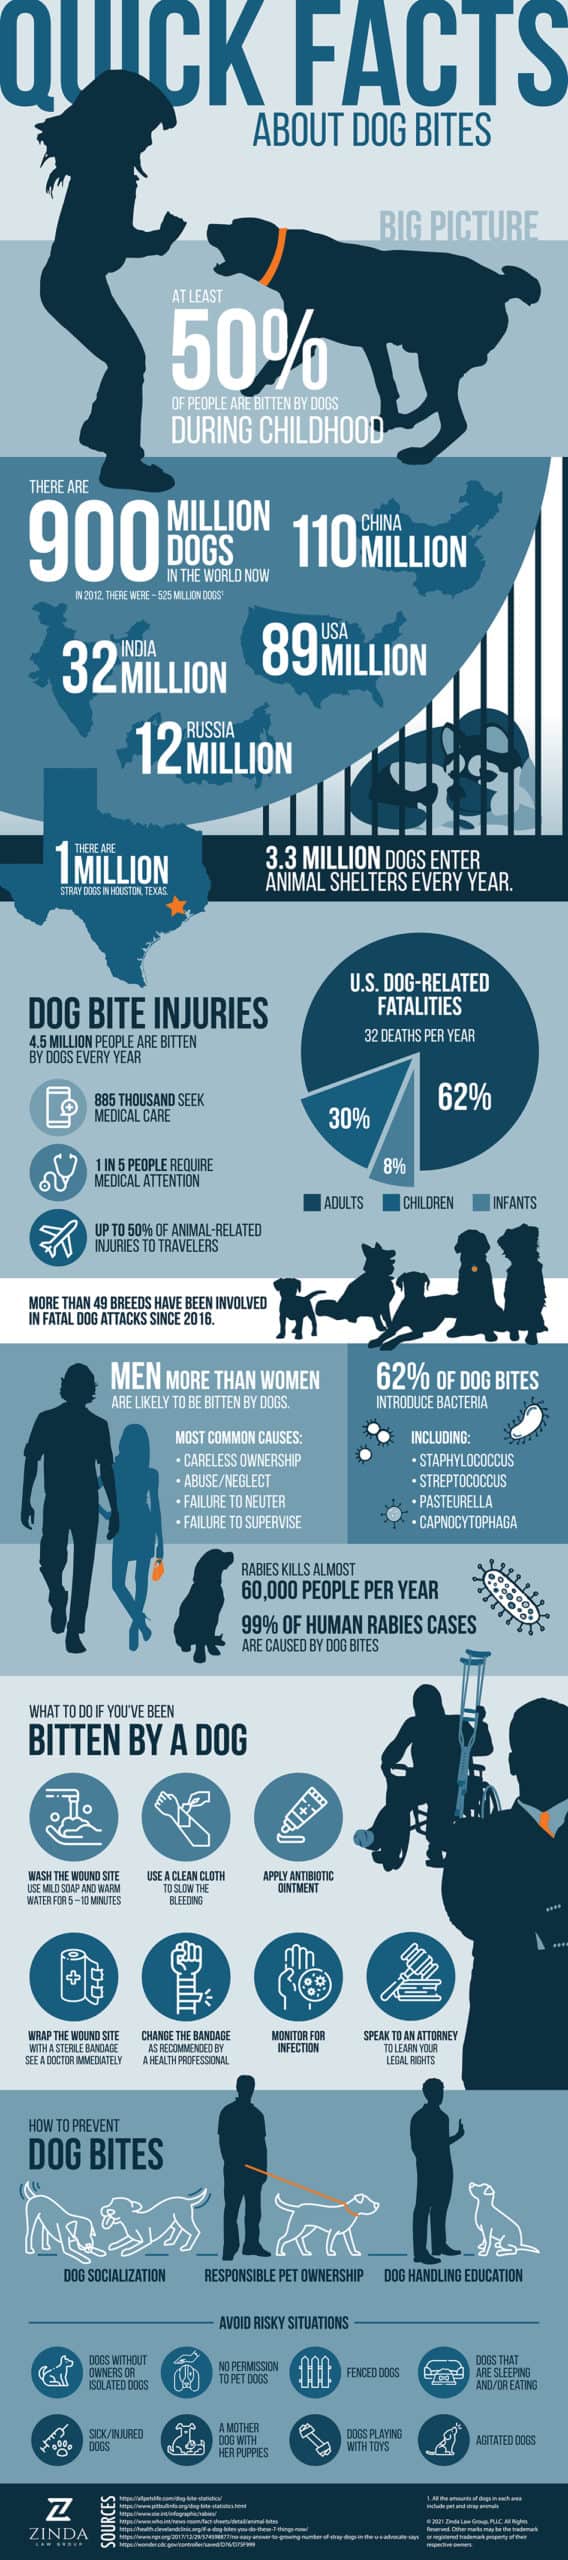 Why Dog Bites Are More Serious Than You'd Think | Daily Infographic